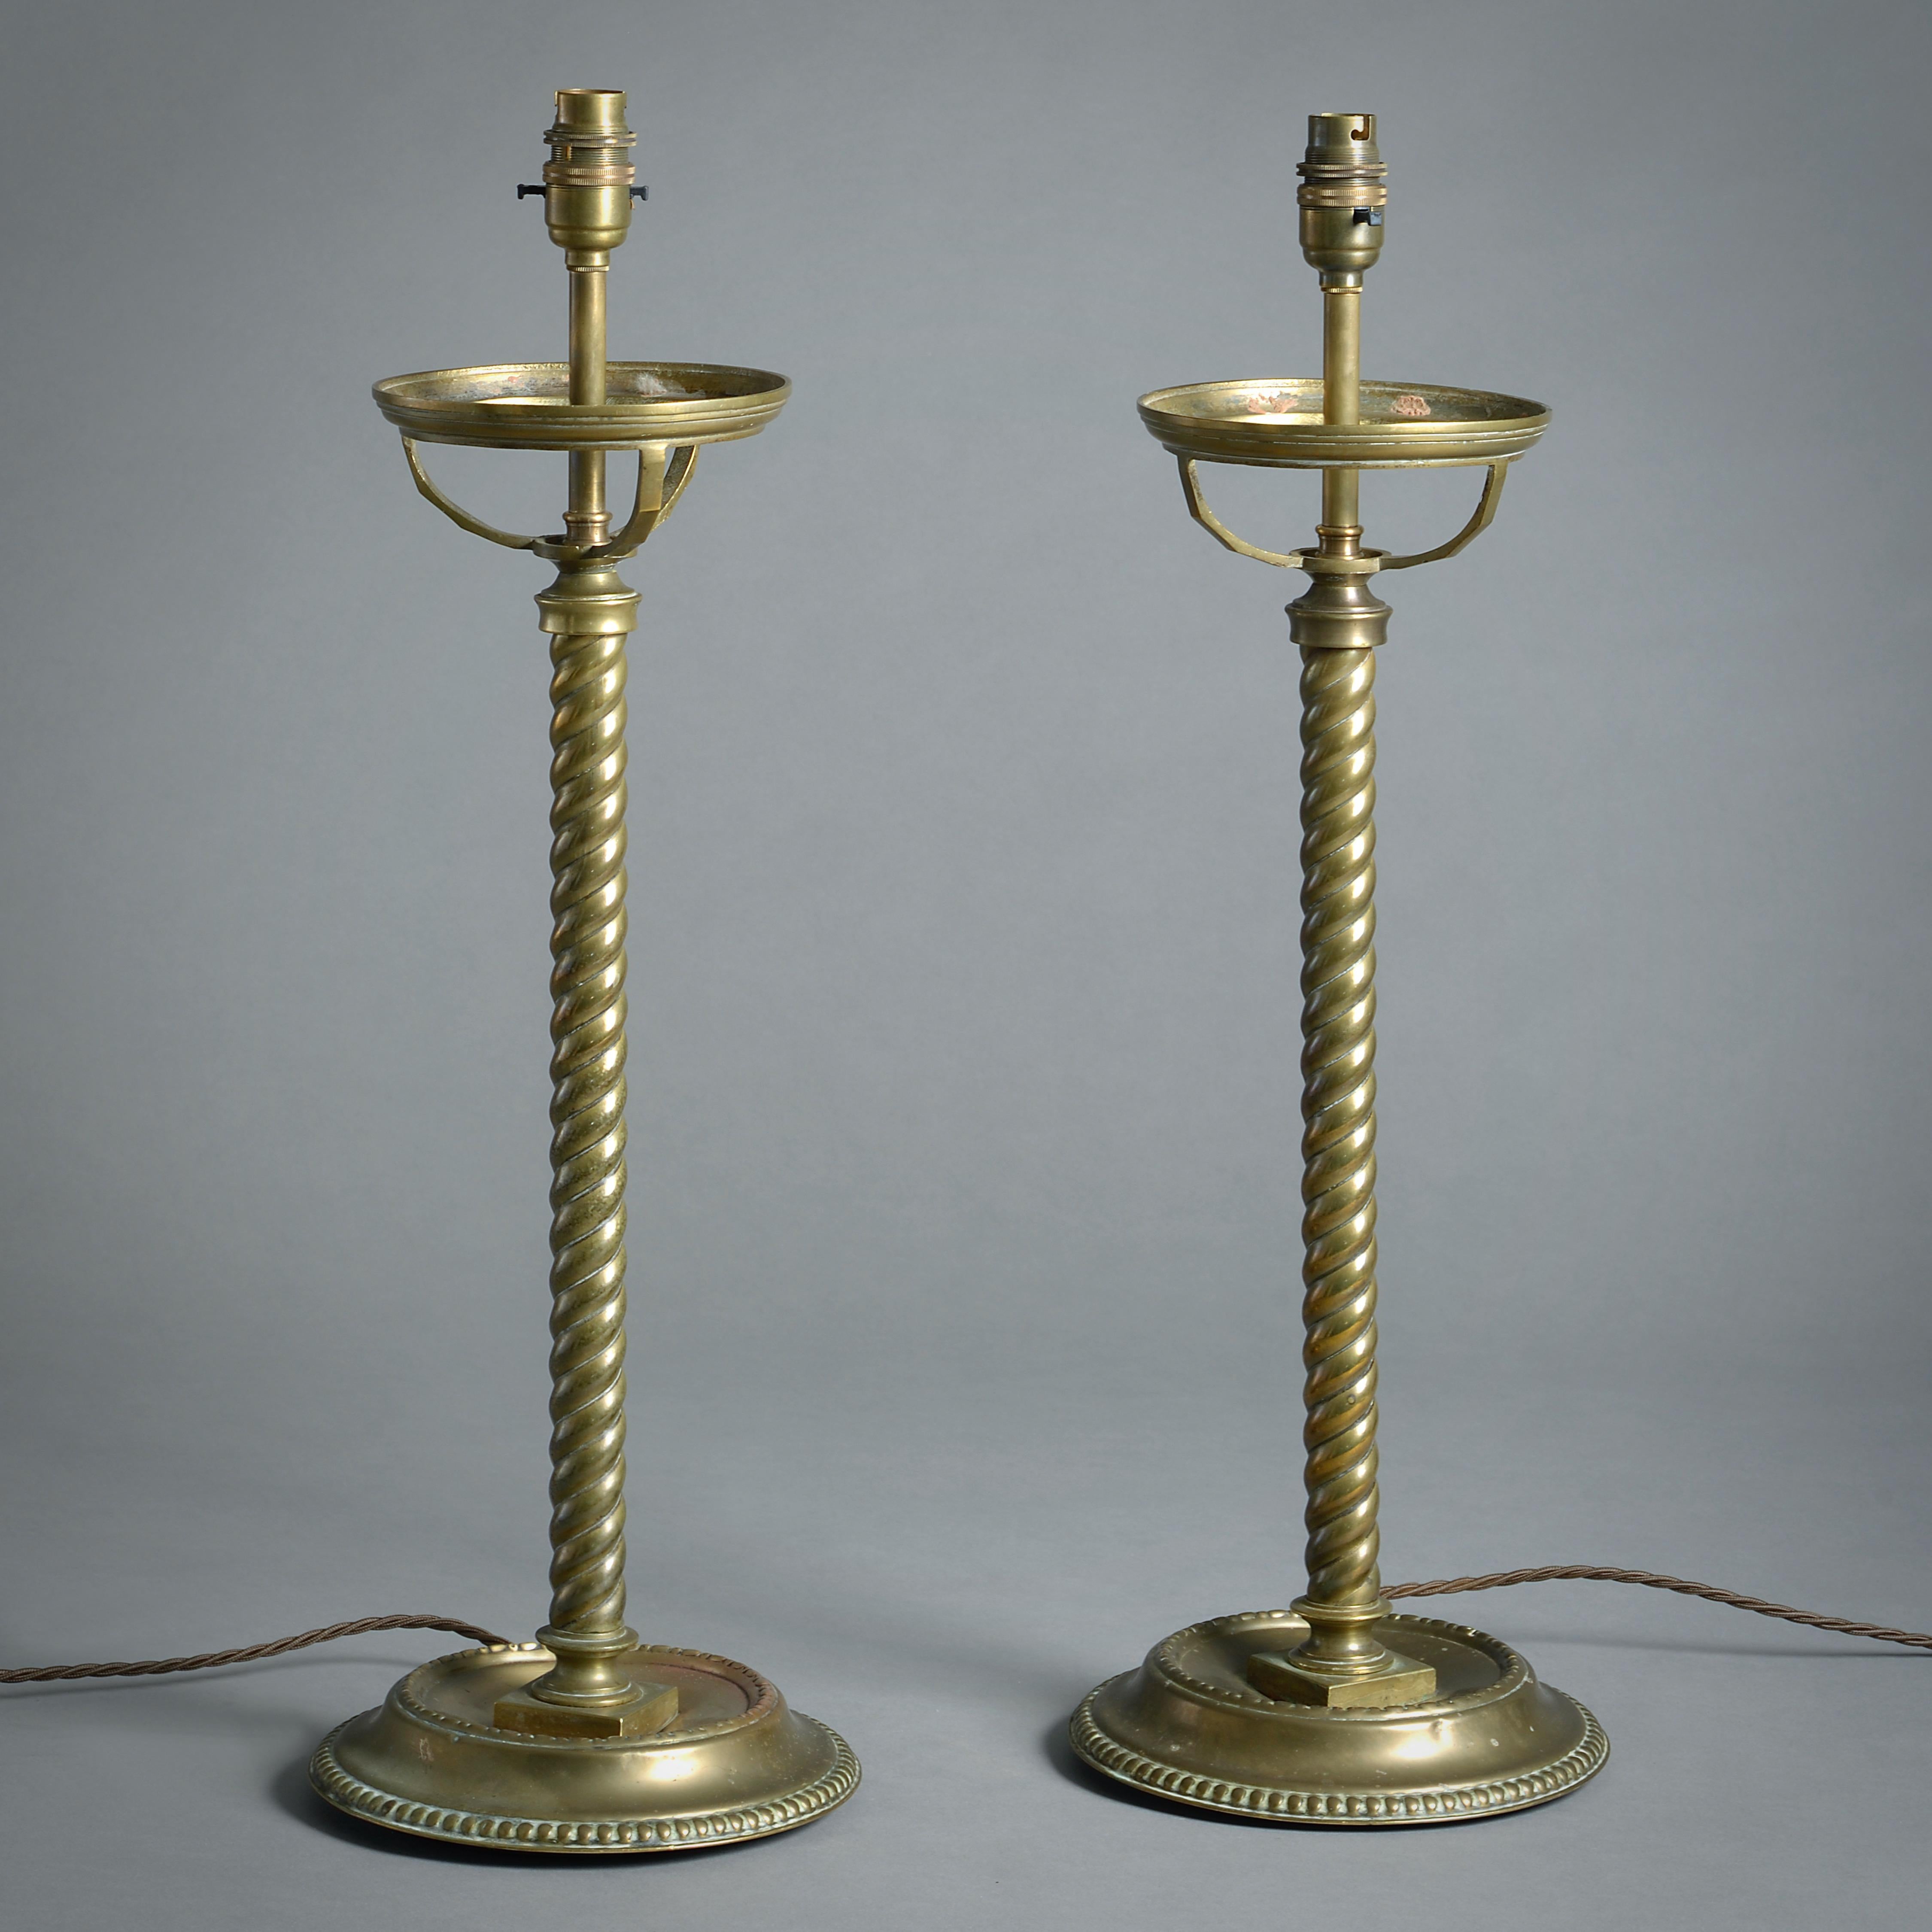 A PAIR OF LATE VICTORIAN BRASS SPIRAL COLUMN TABLE-LAMPS, CIRCA 1900.

19in. (48cm) high, exc. fitment